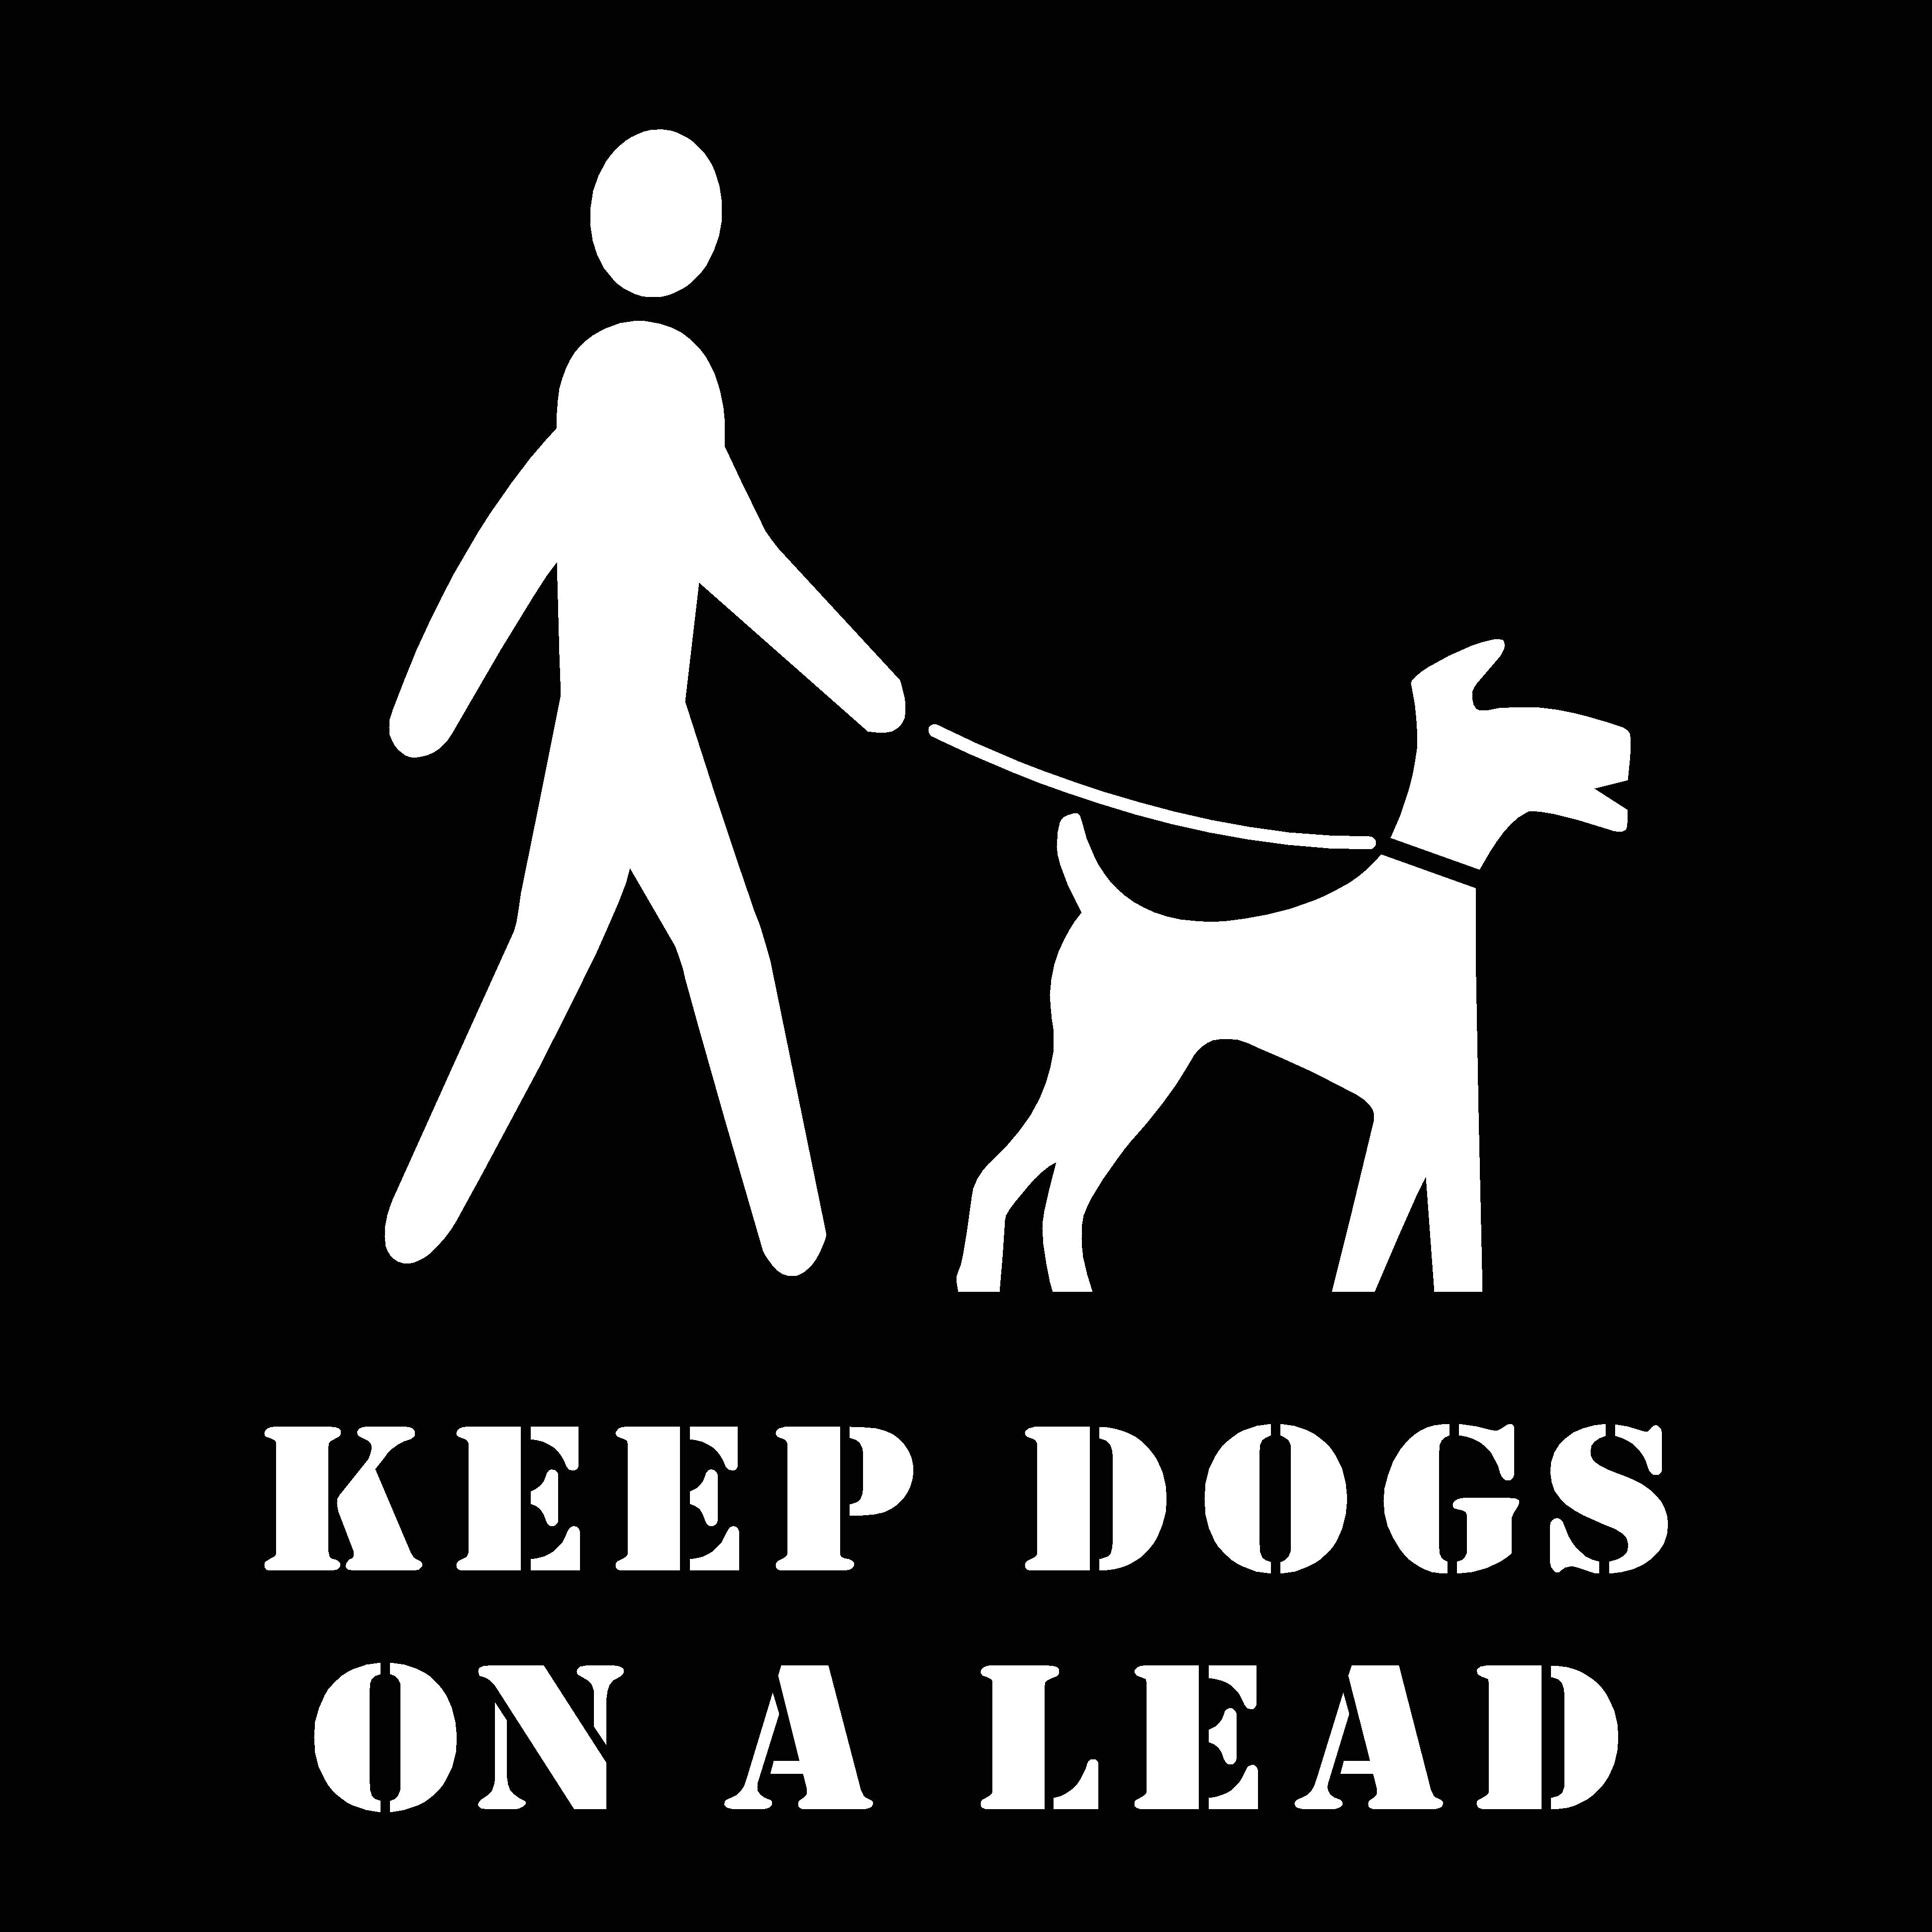 Dogs on a Lead Stencil